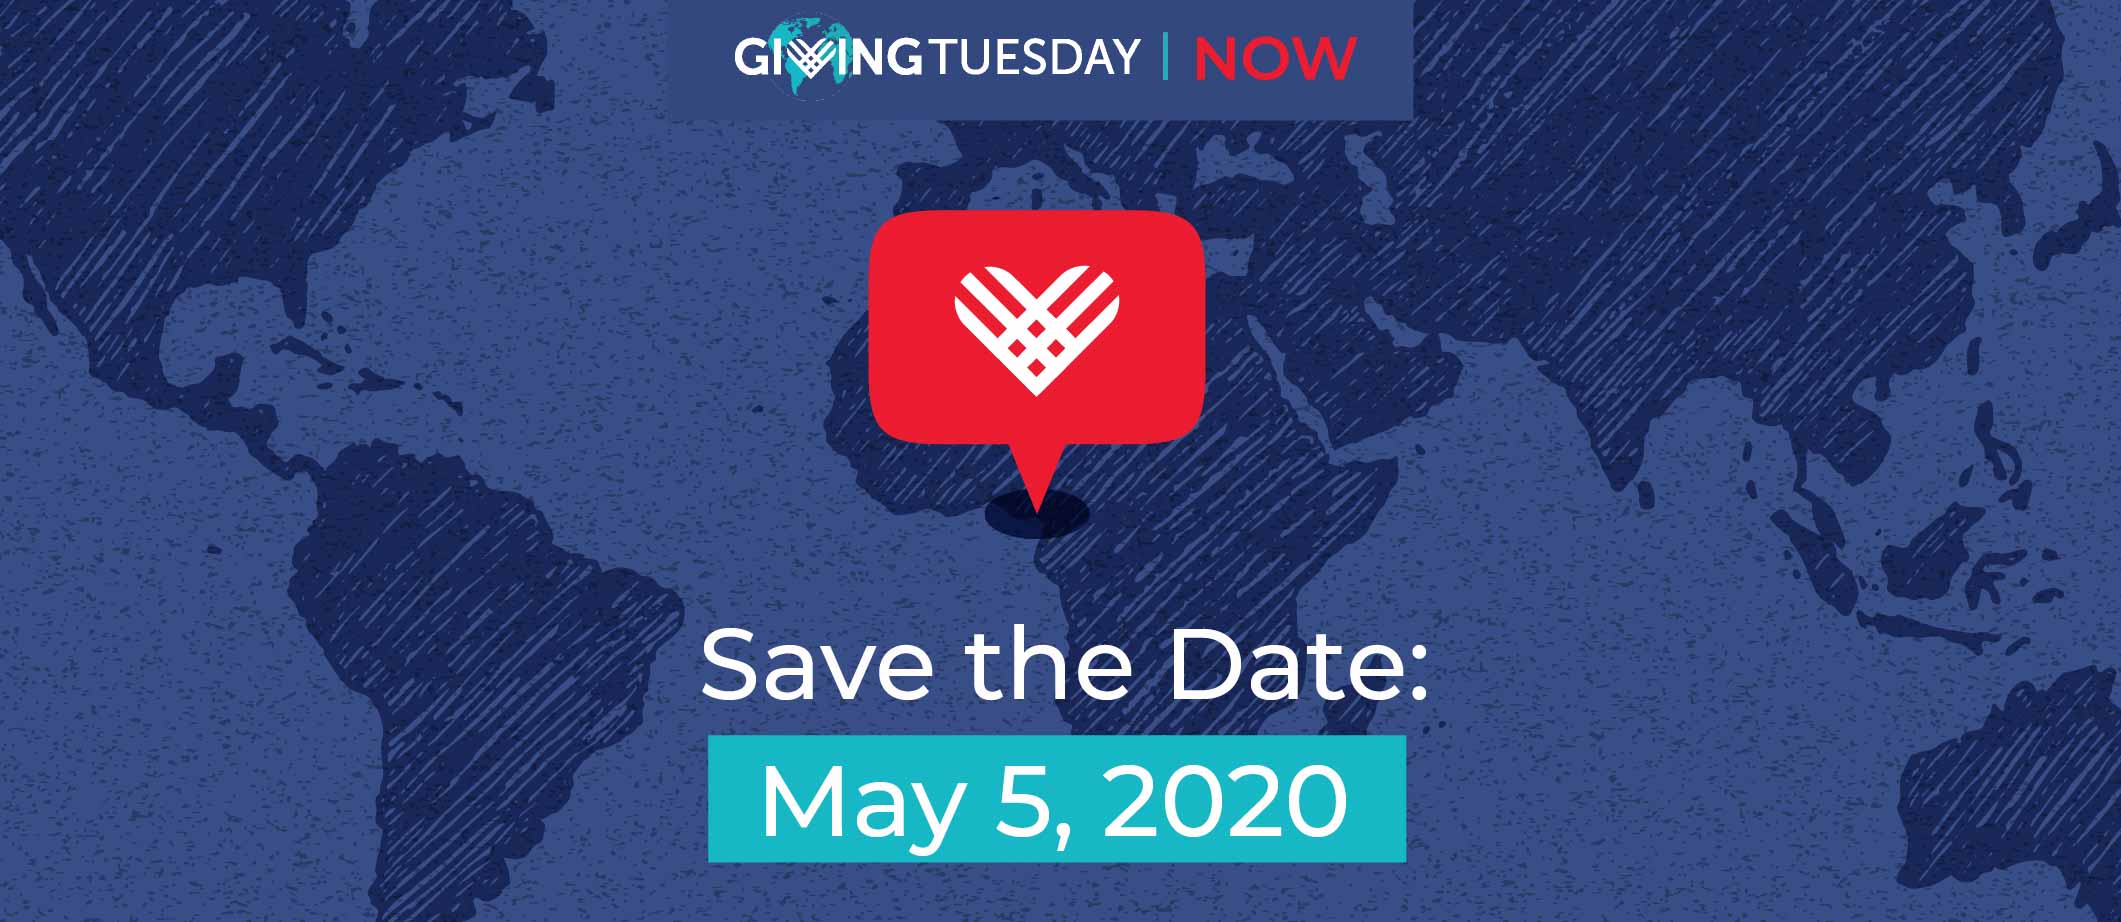 #GivingTuesdayNow - Save the date - May 5, 2020